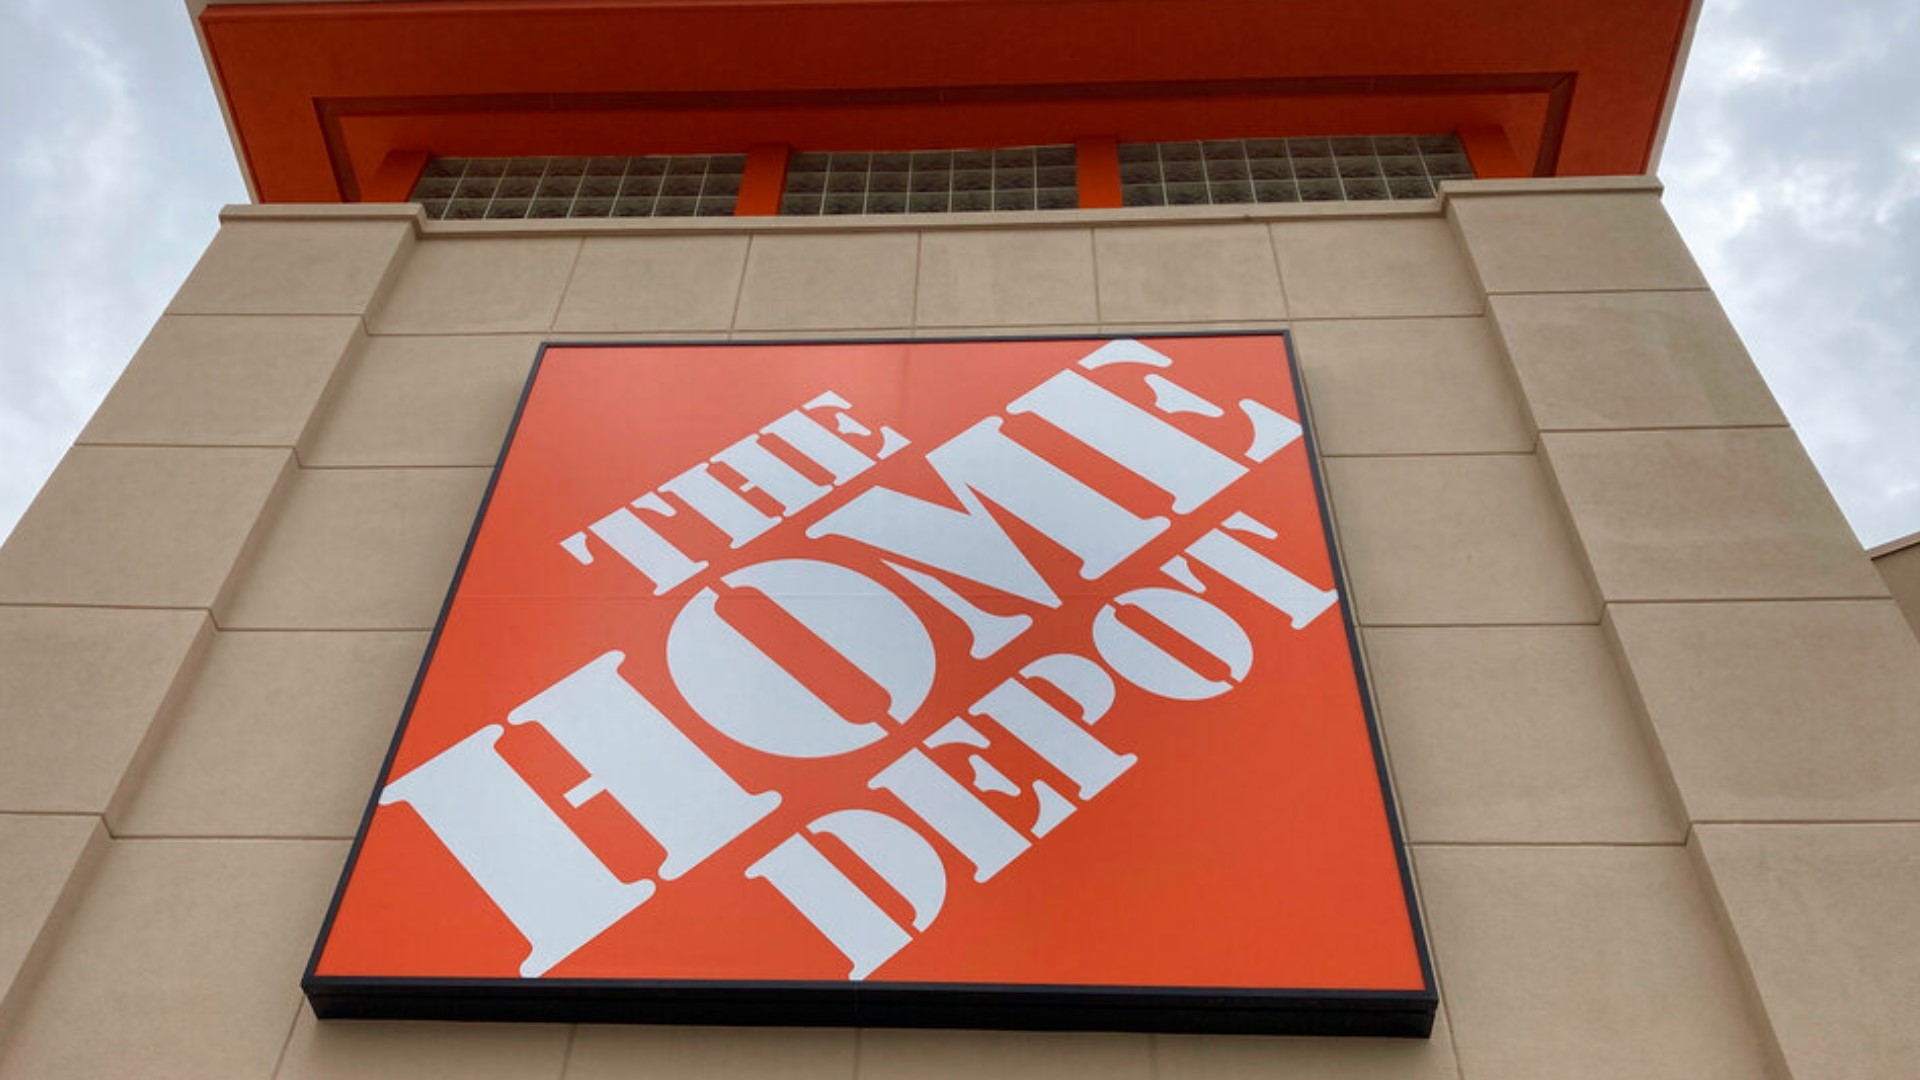 The Home Depot confirms some corporate layoffs